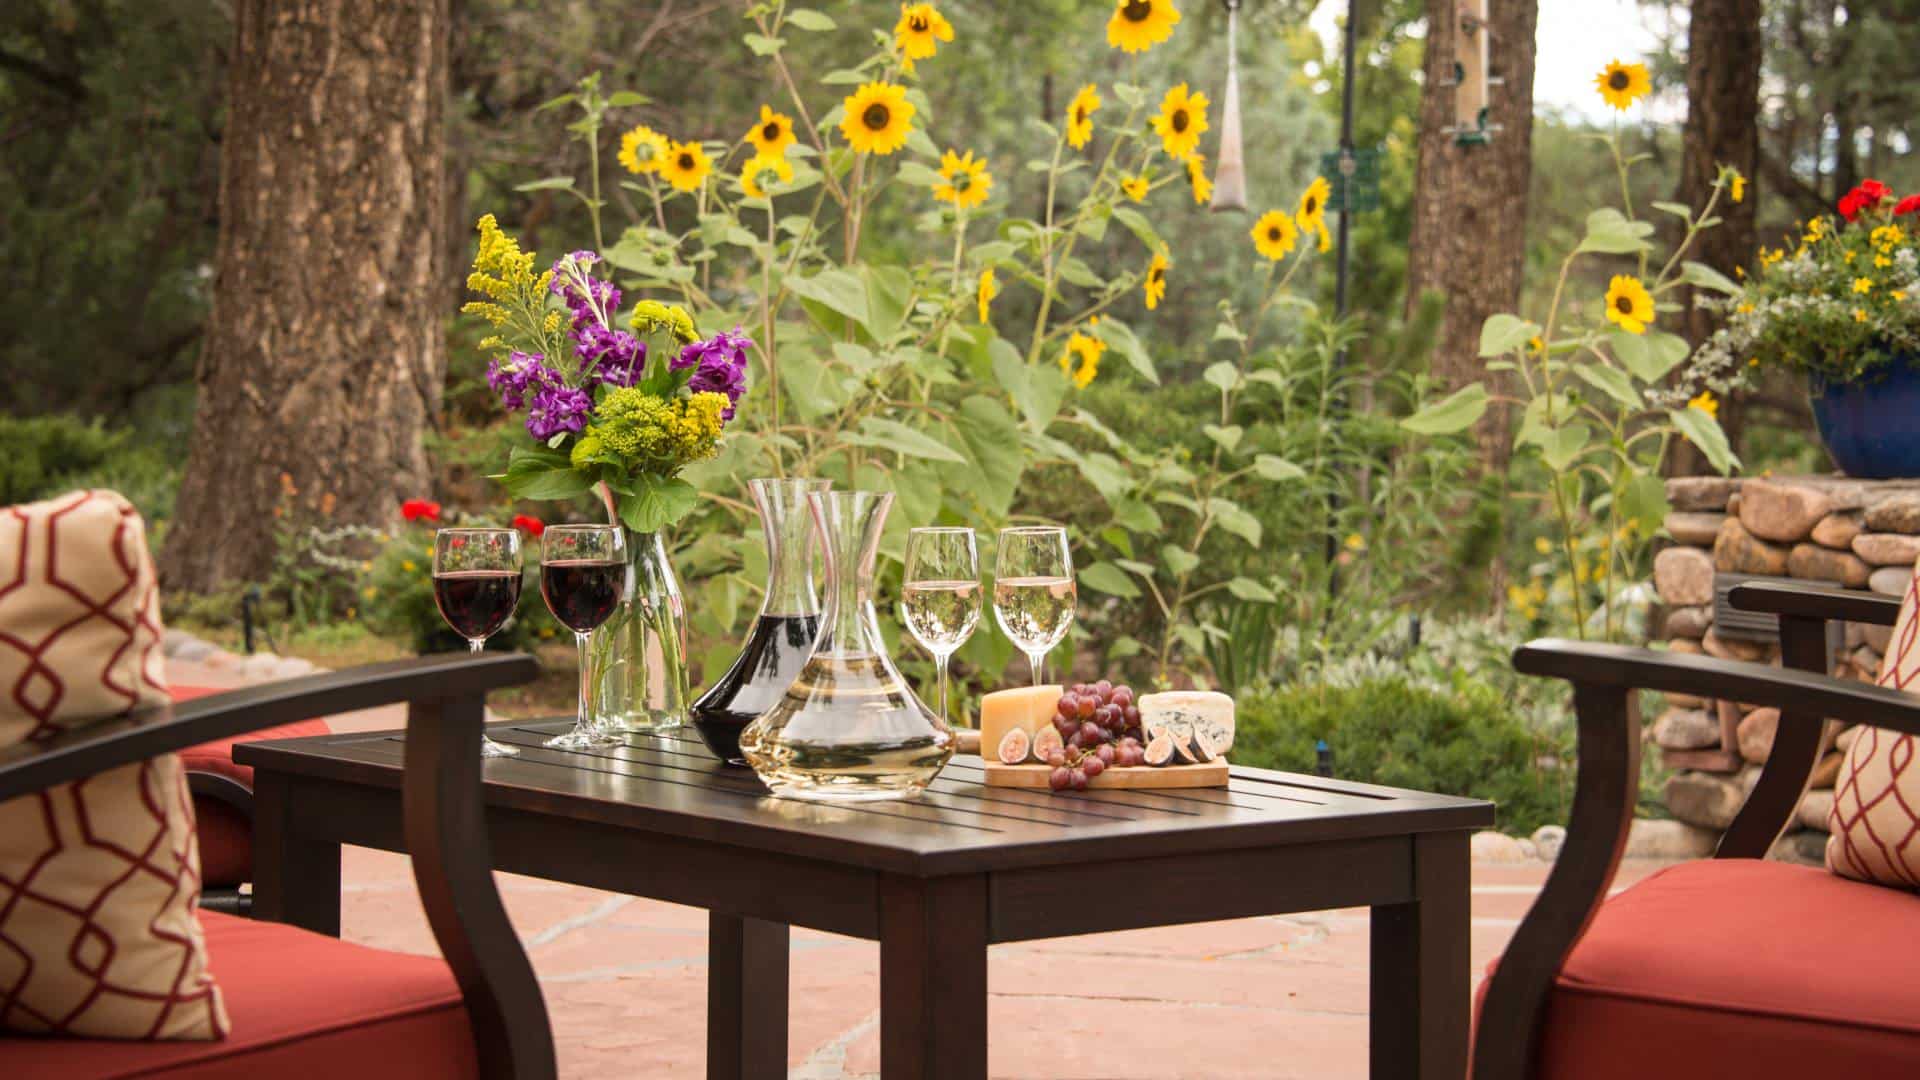 Dark wooden coffee table on stone patio with white and red wine decanters, glasses of poured white and red wine, and wooden tray with cheese and grapes